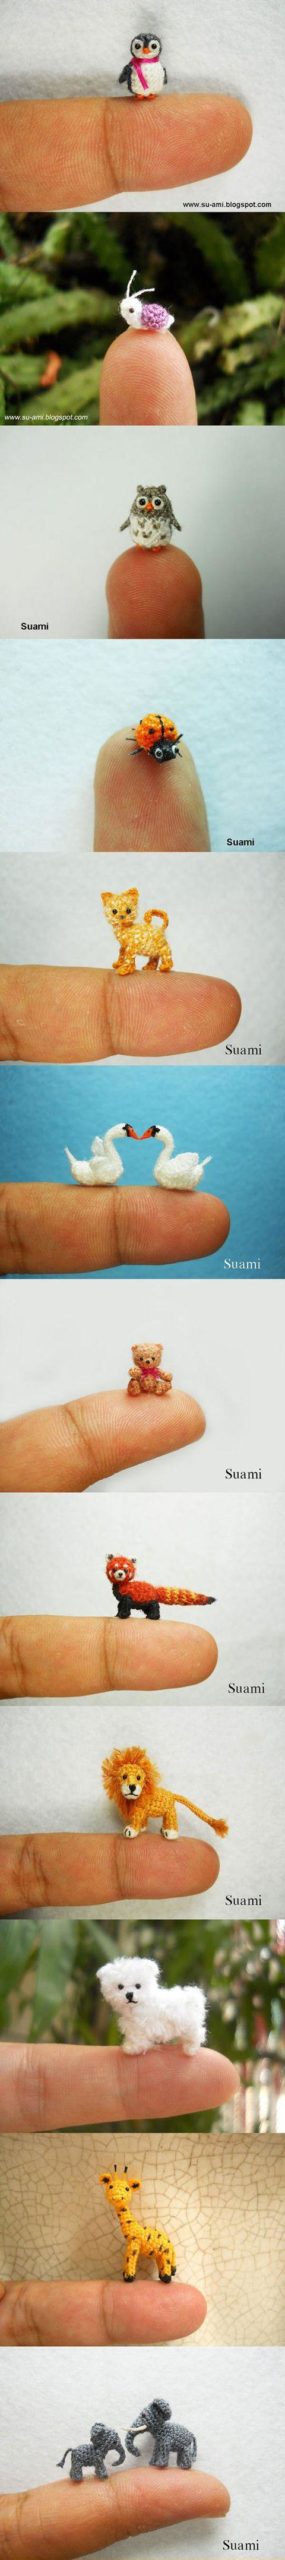 The+tiniest+animals+by+Suami